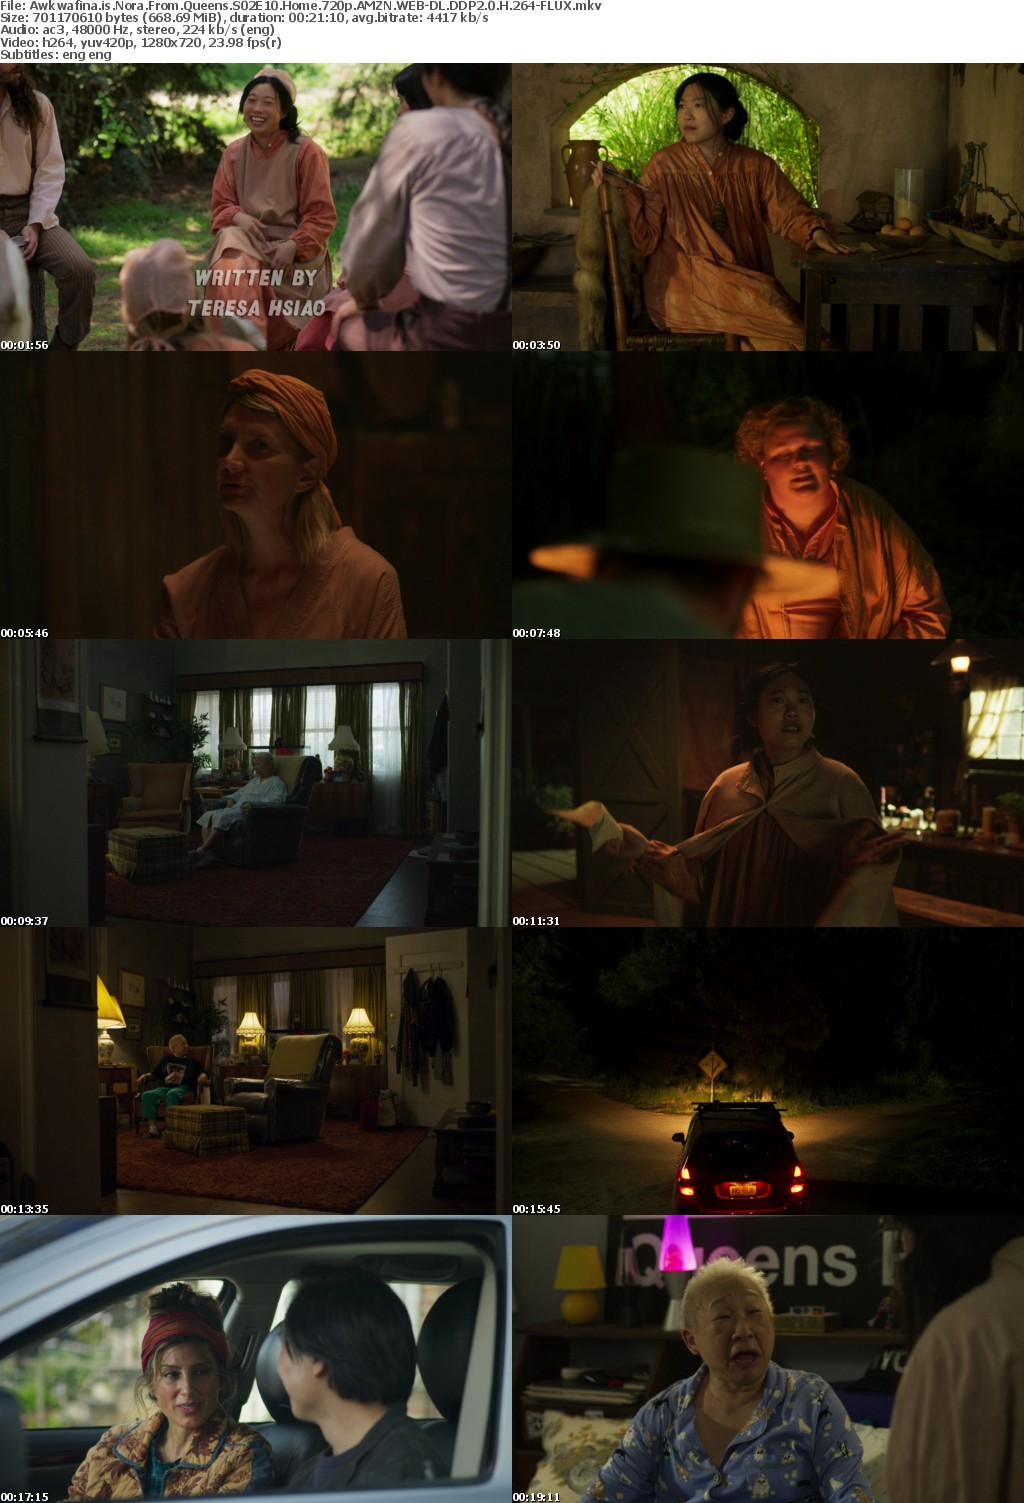 Awkwafina is Nora From Queens S02E10 Home 720p AMZN WEBRip DDP2 0 x264-FLUX